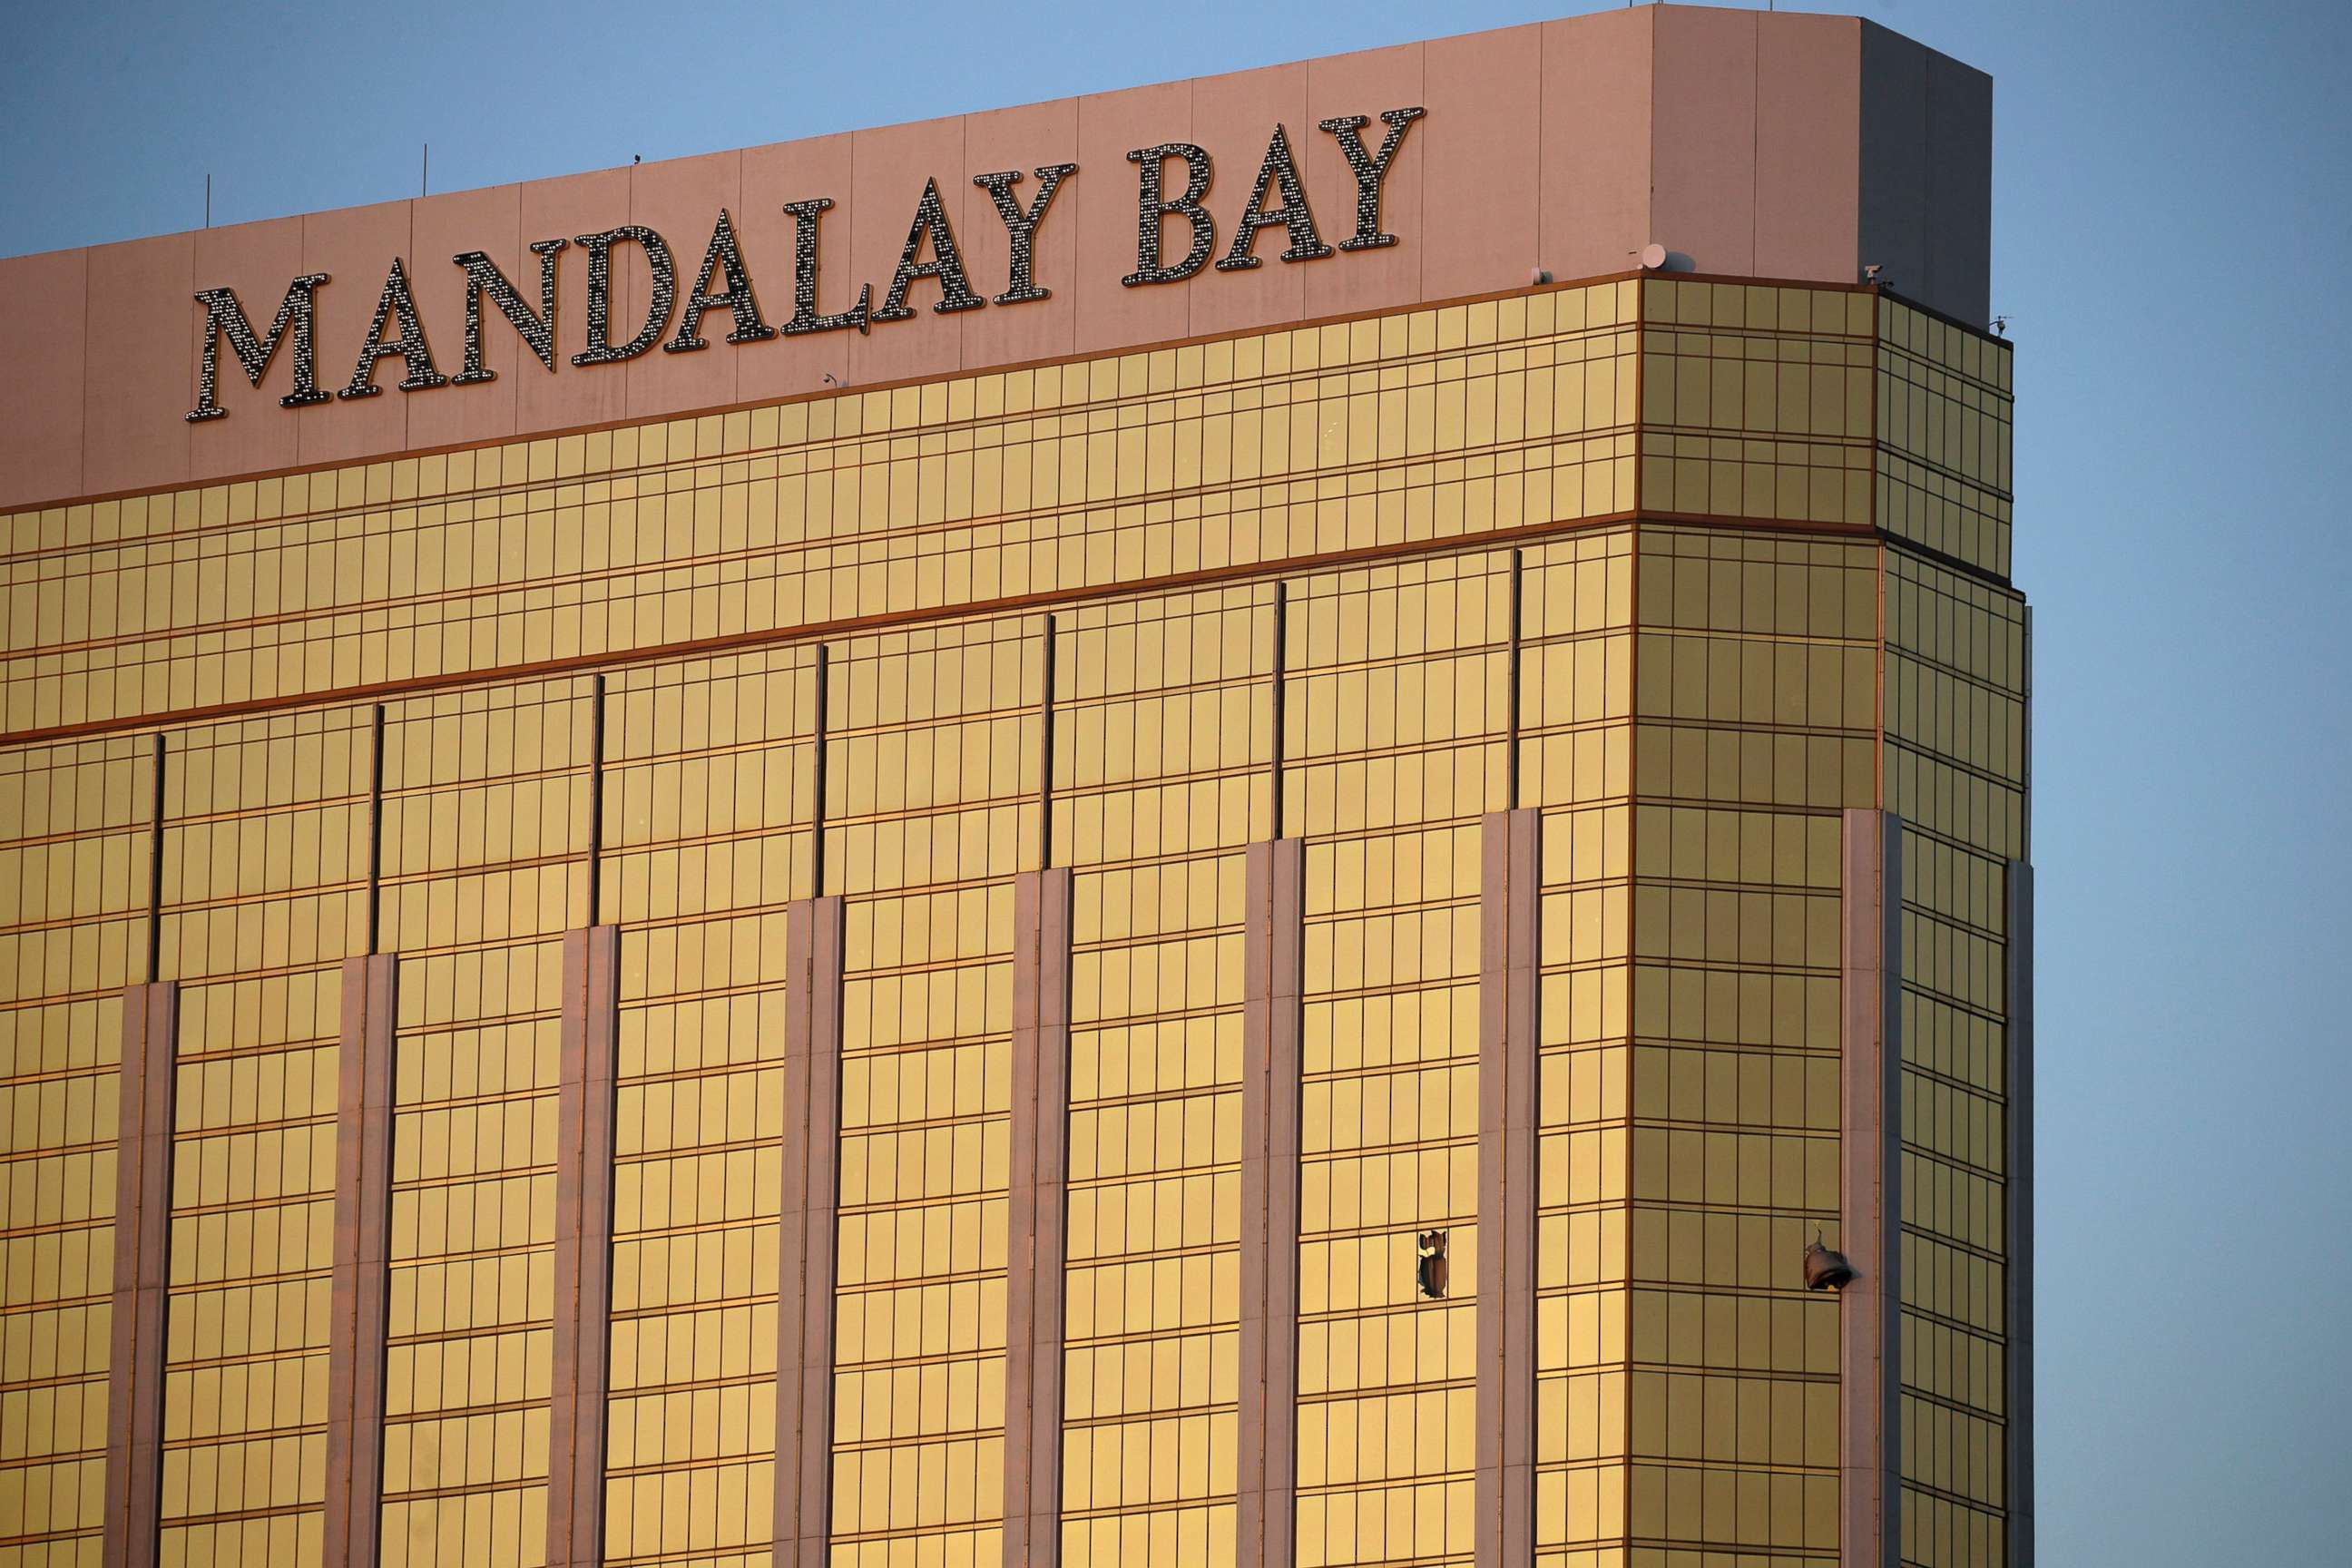 PHOTO: Drapes billow out of broken windows at the Mandalay Bay resort and casino on the Las Vegas Strip, Oct. 2, 2017, following a deadly shooting at a music festival.